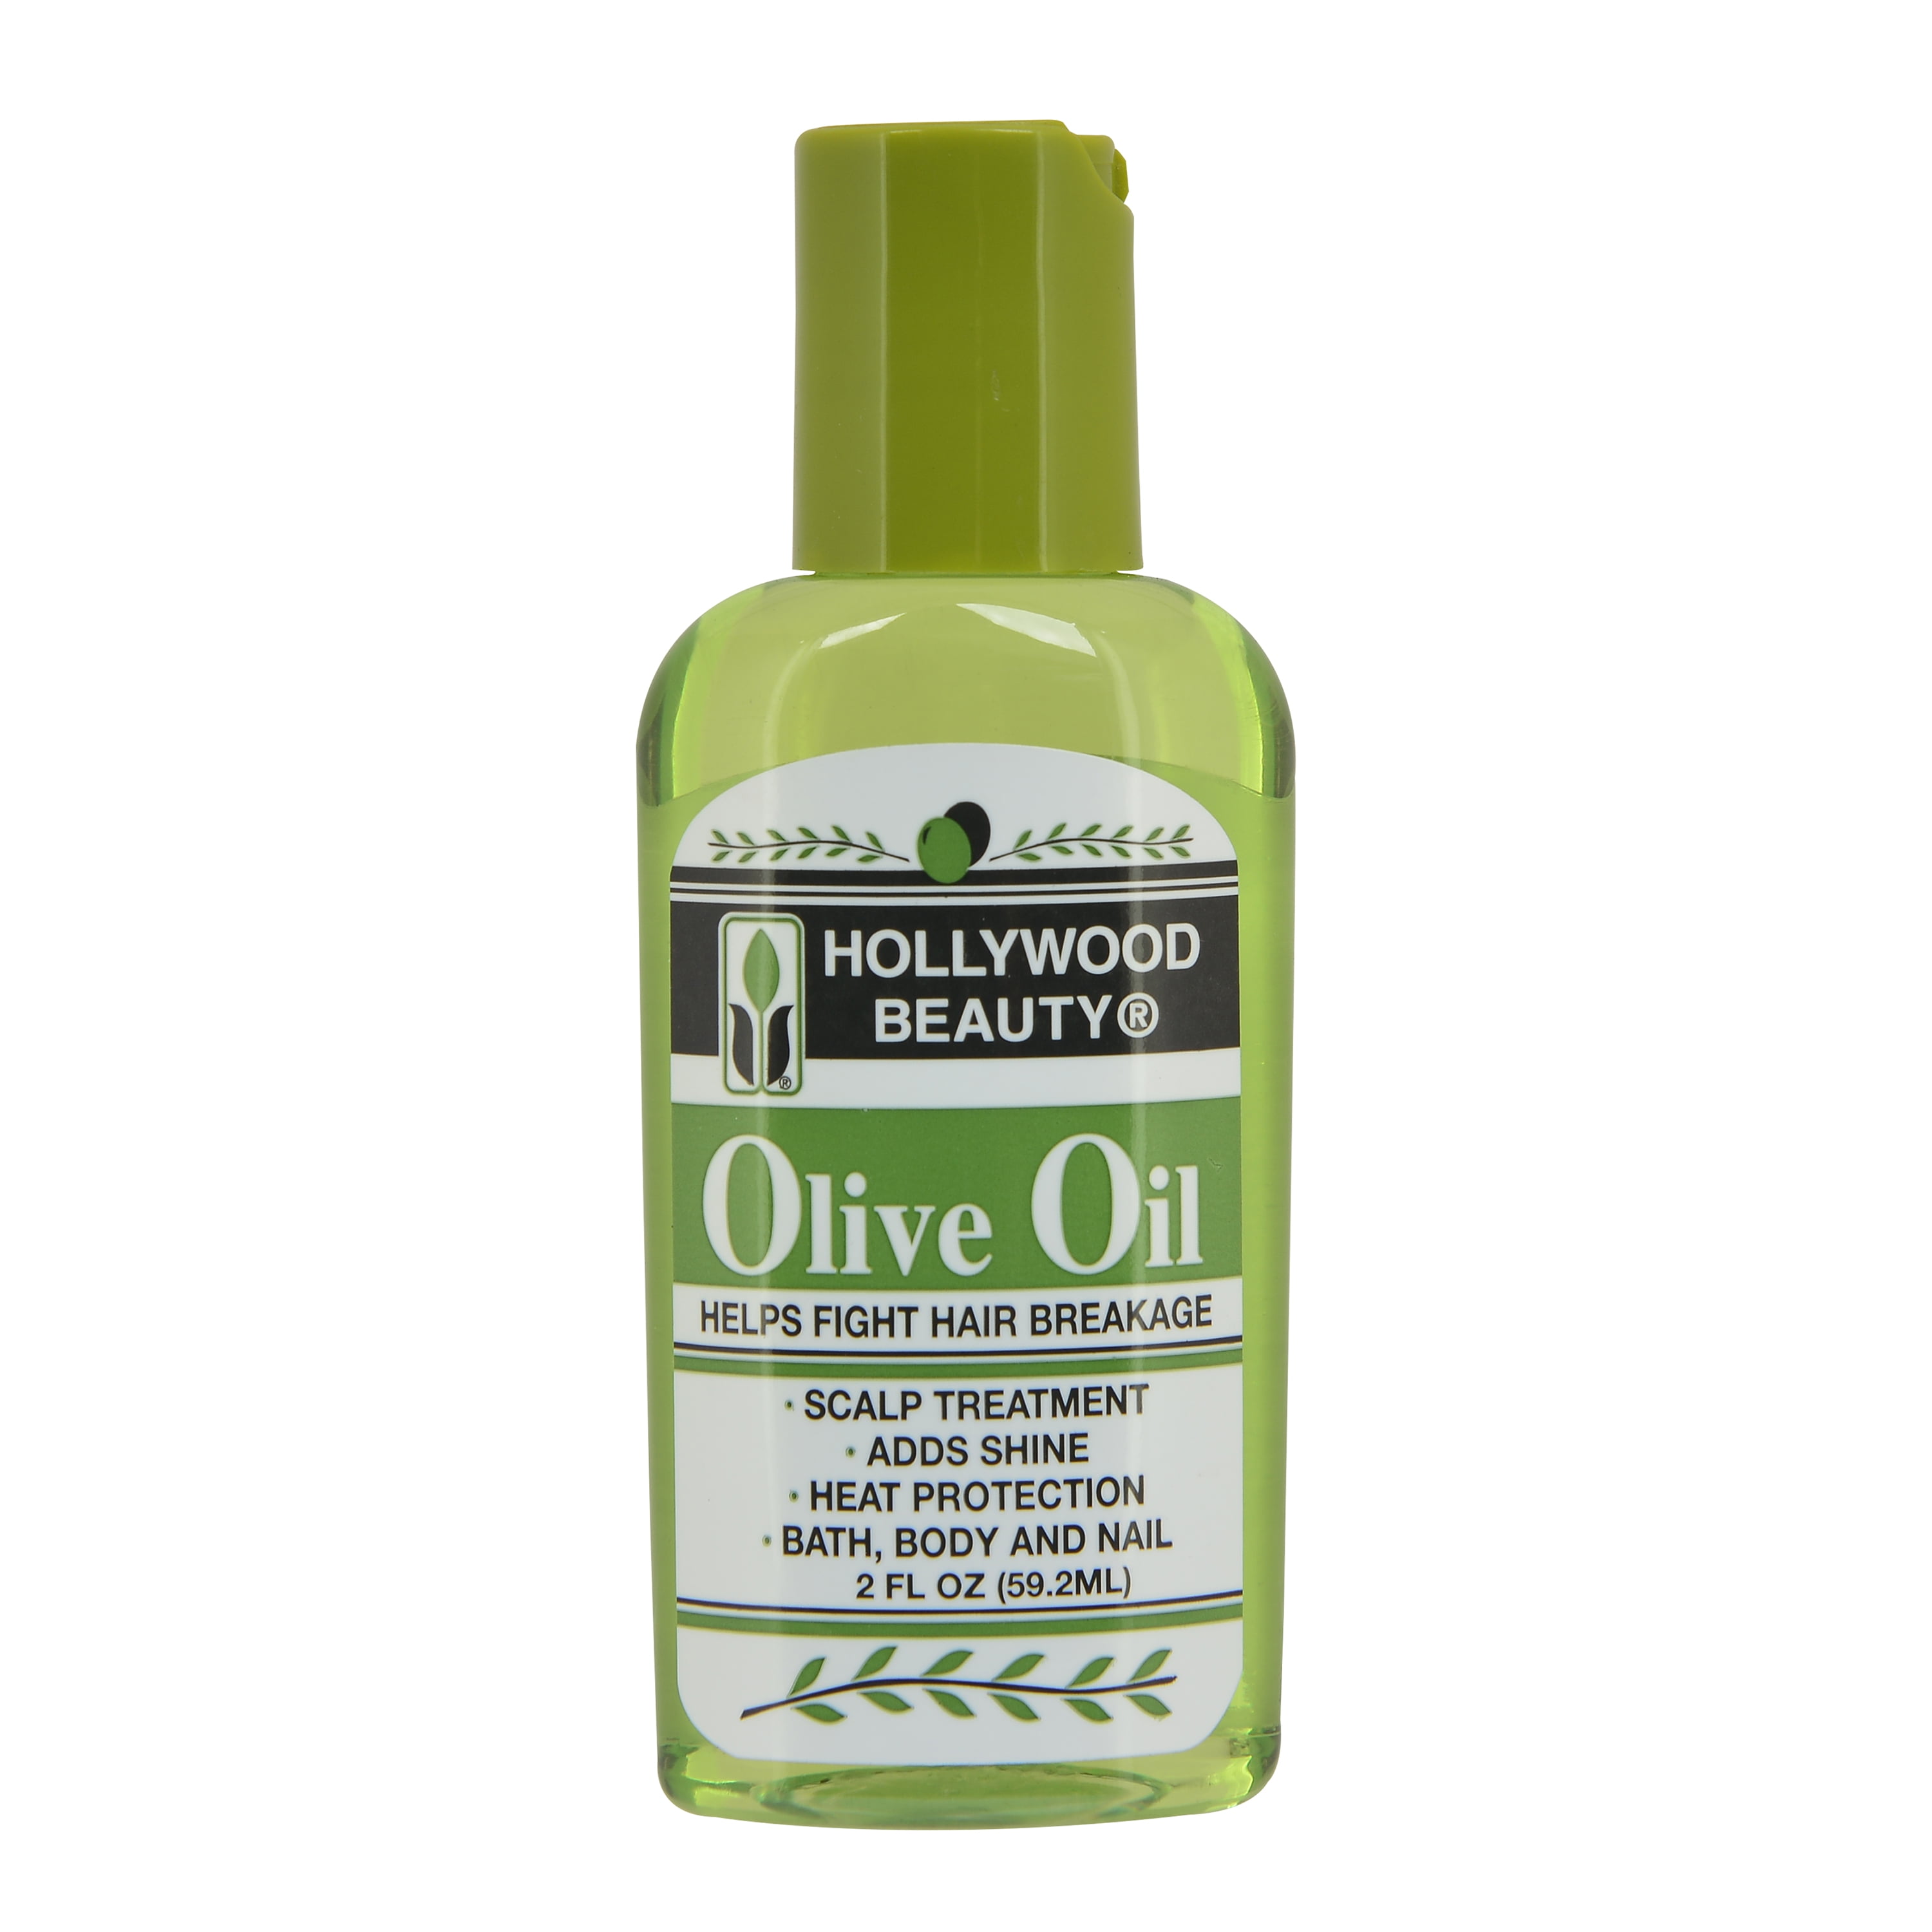 Hollywood Beauty Olive Oil 